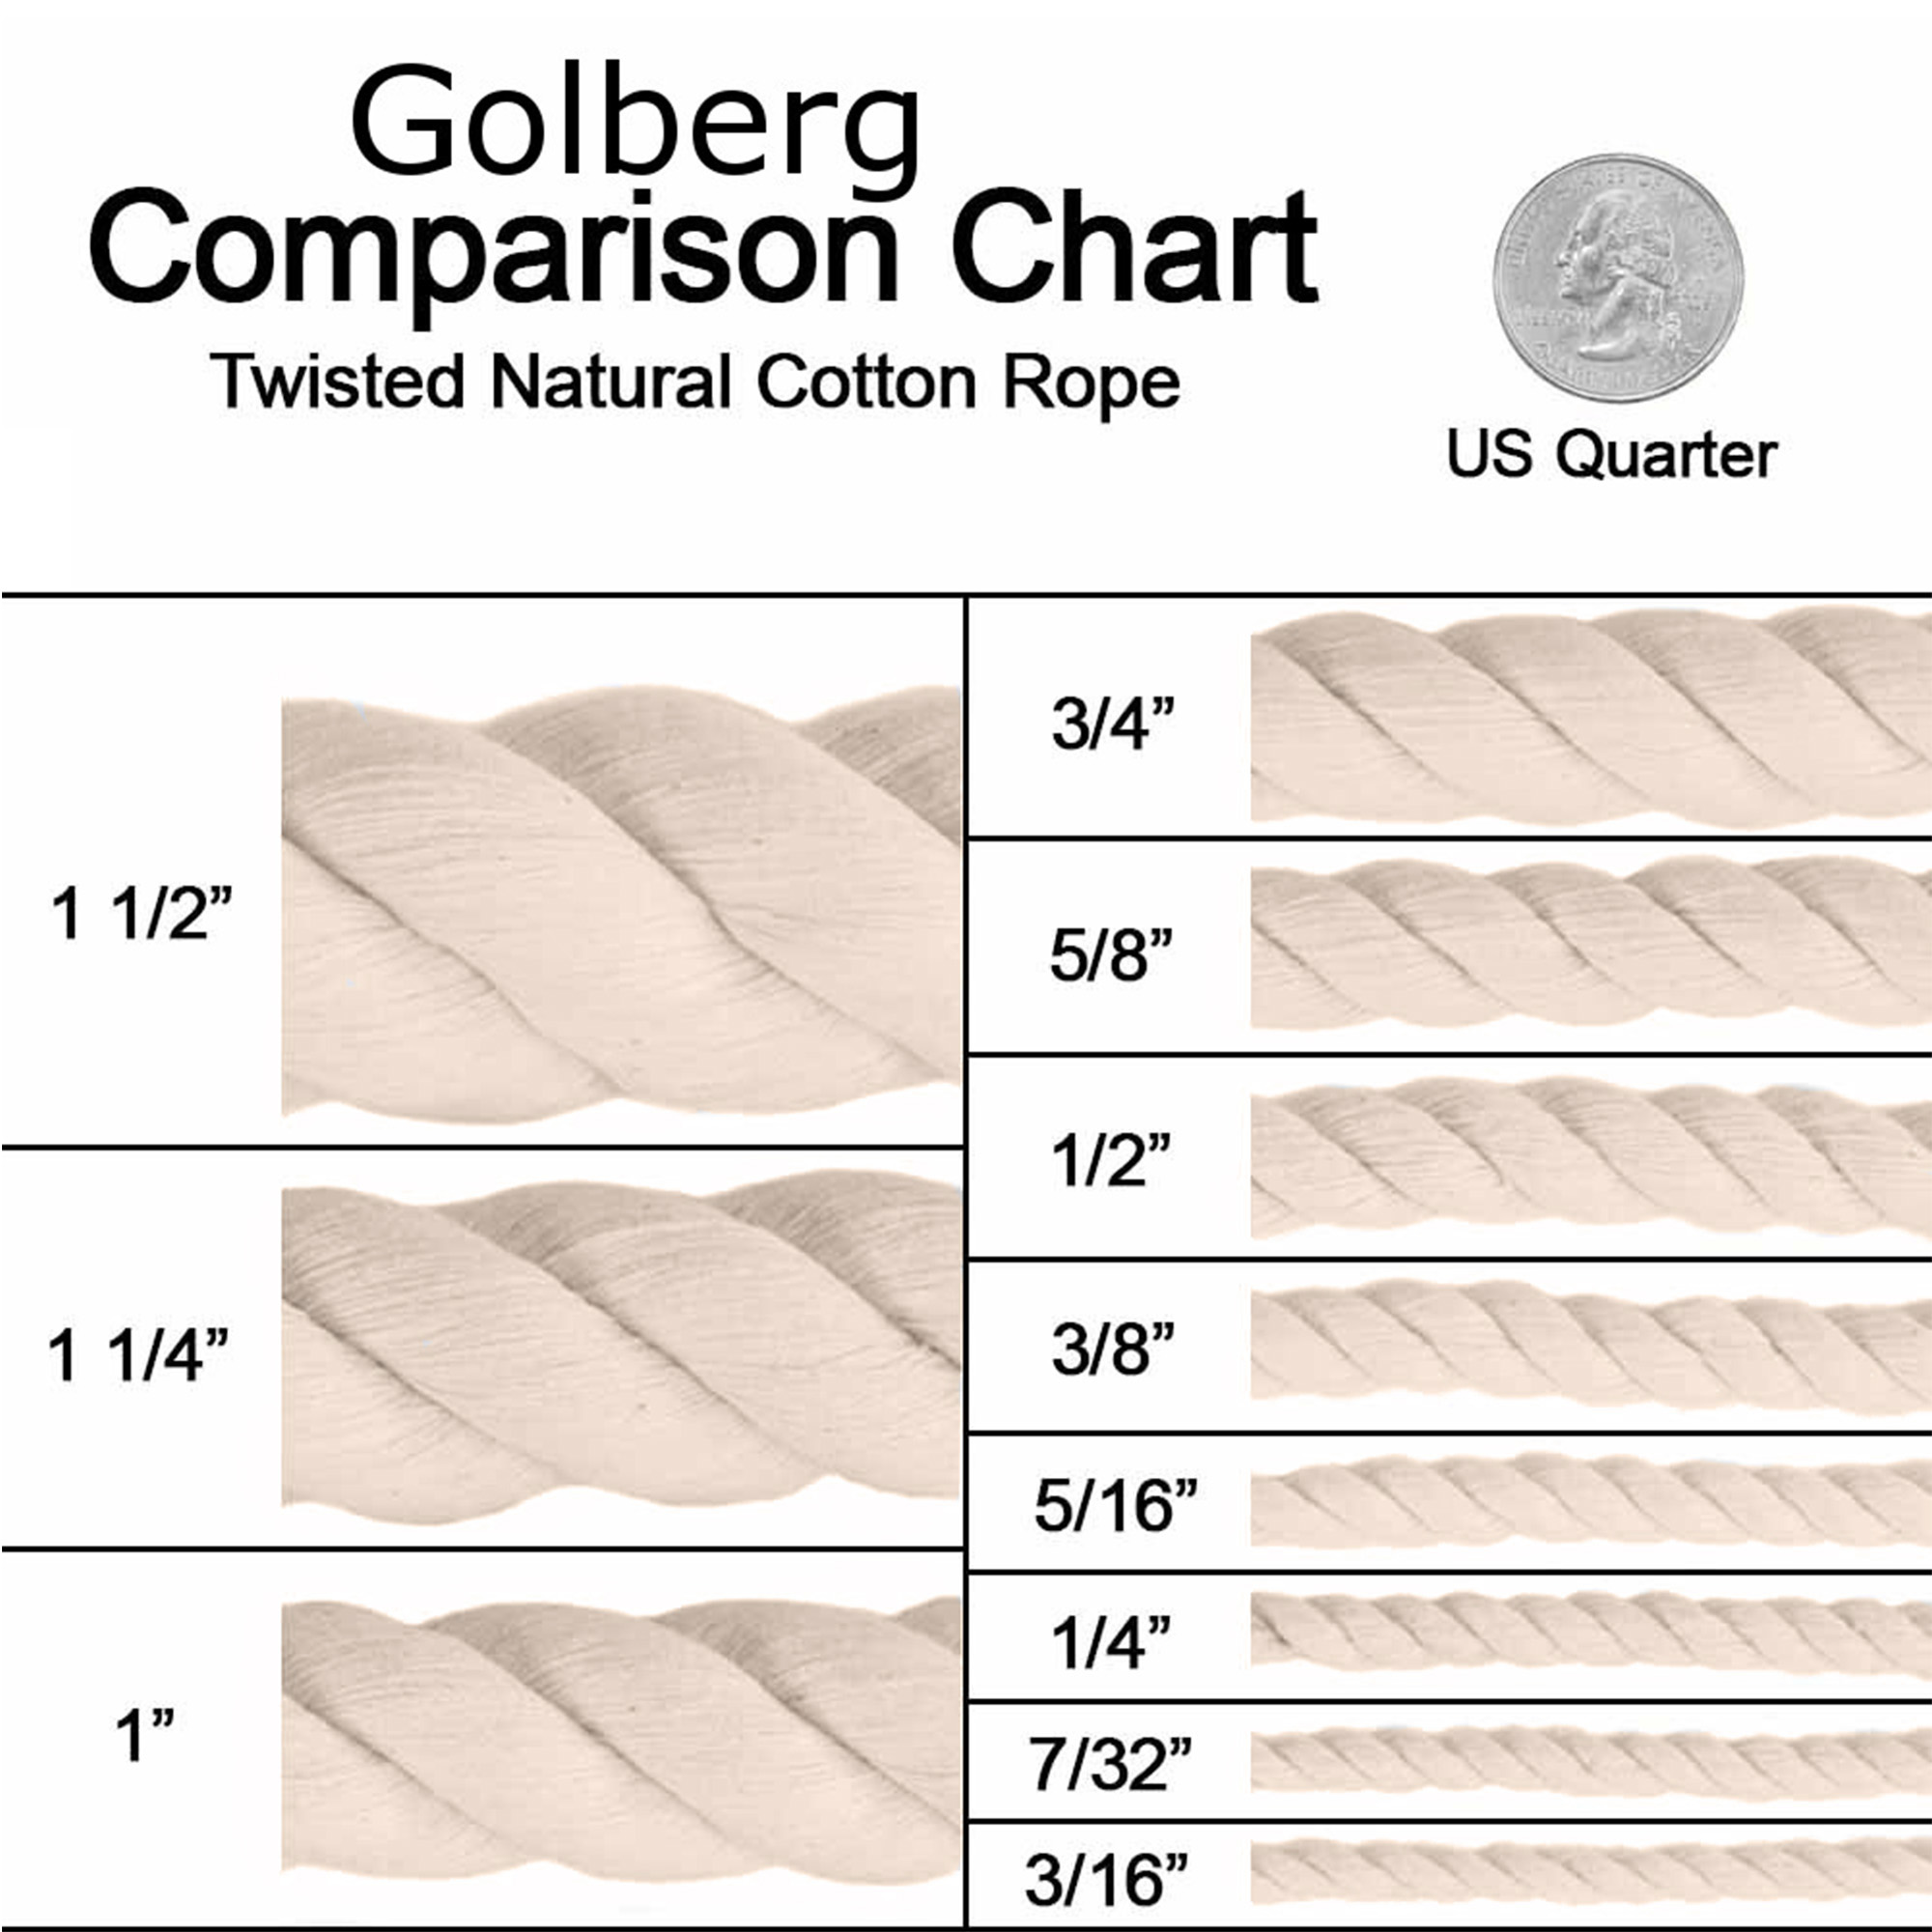 Golberg 100% Natural Cotton Rope - 5/32, 3/16, 7/32, 1/4, 5/16, 3/8, 1/2, 5/8, 3/4, 1, 1-1/4, and 1-1/2 Inch Diameters - Twisted White Cotton Rope - Several Lengths to Choose From - image 4 of 4